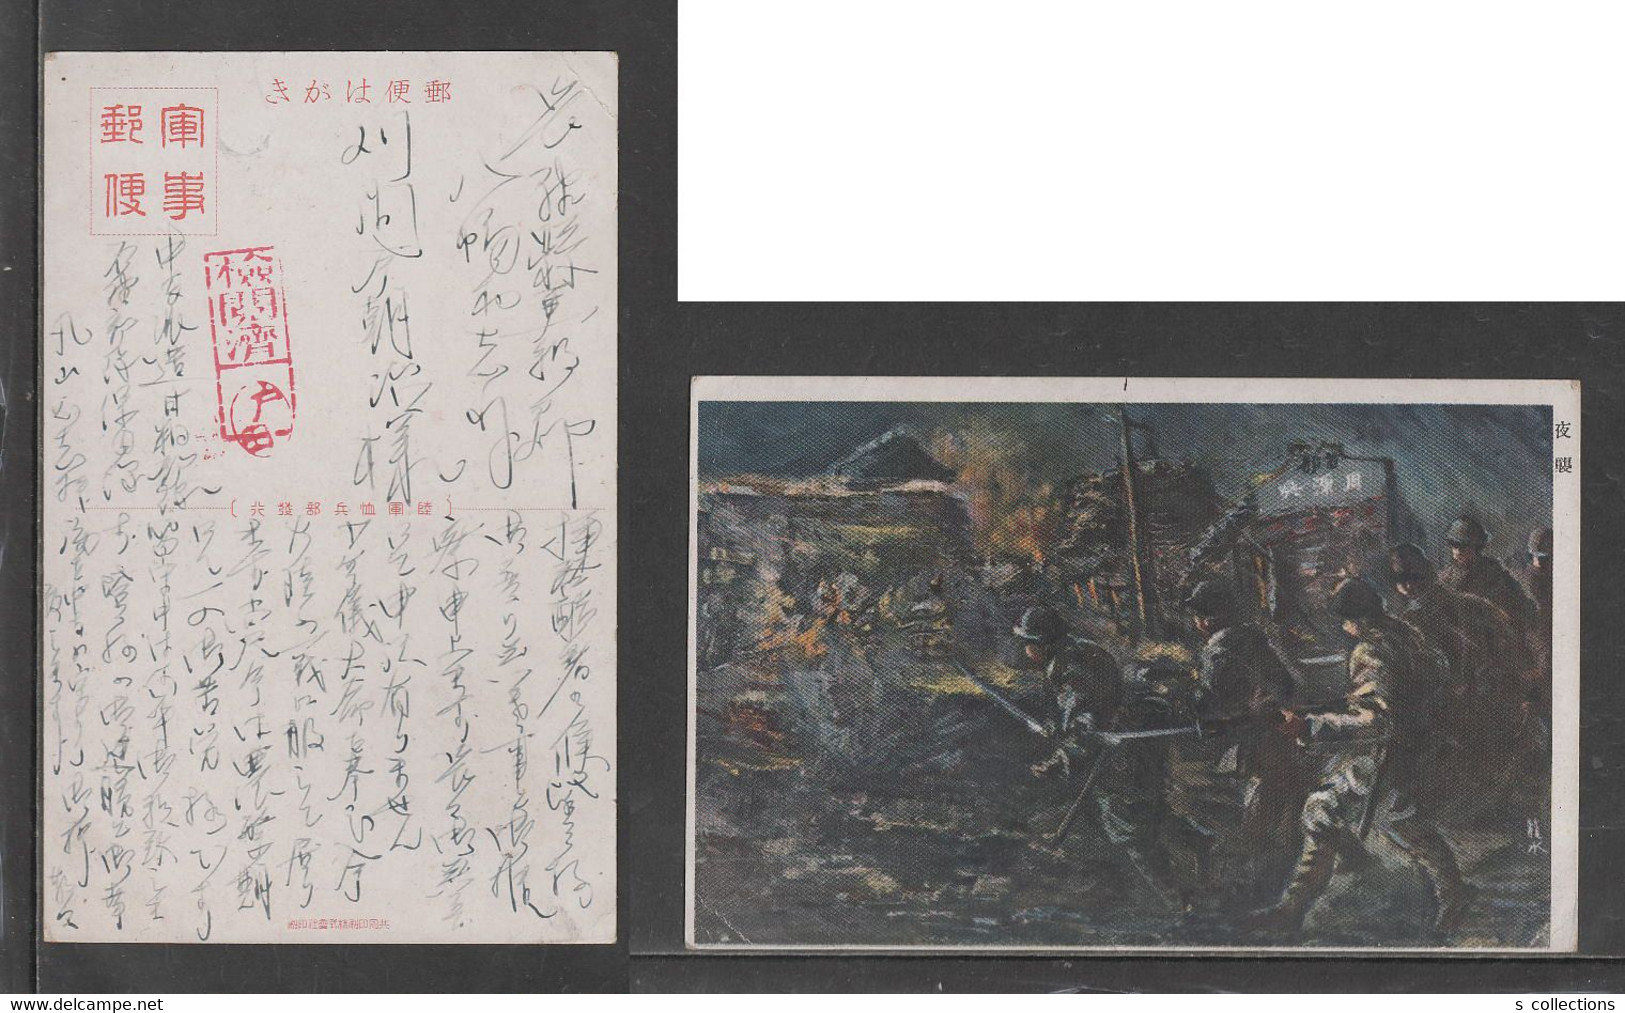 JAPAN WWII Military Picture Japanese Soldier Postcard CENTRAL CHINA WW2 MANCHURIA CHINE MANDCHOUKOUO JAPON GIAPPONE - 1943-45 Shanghai & Nankin